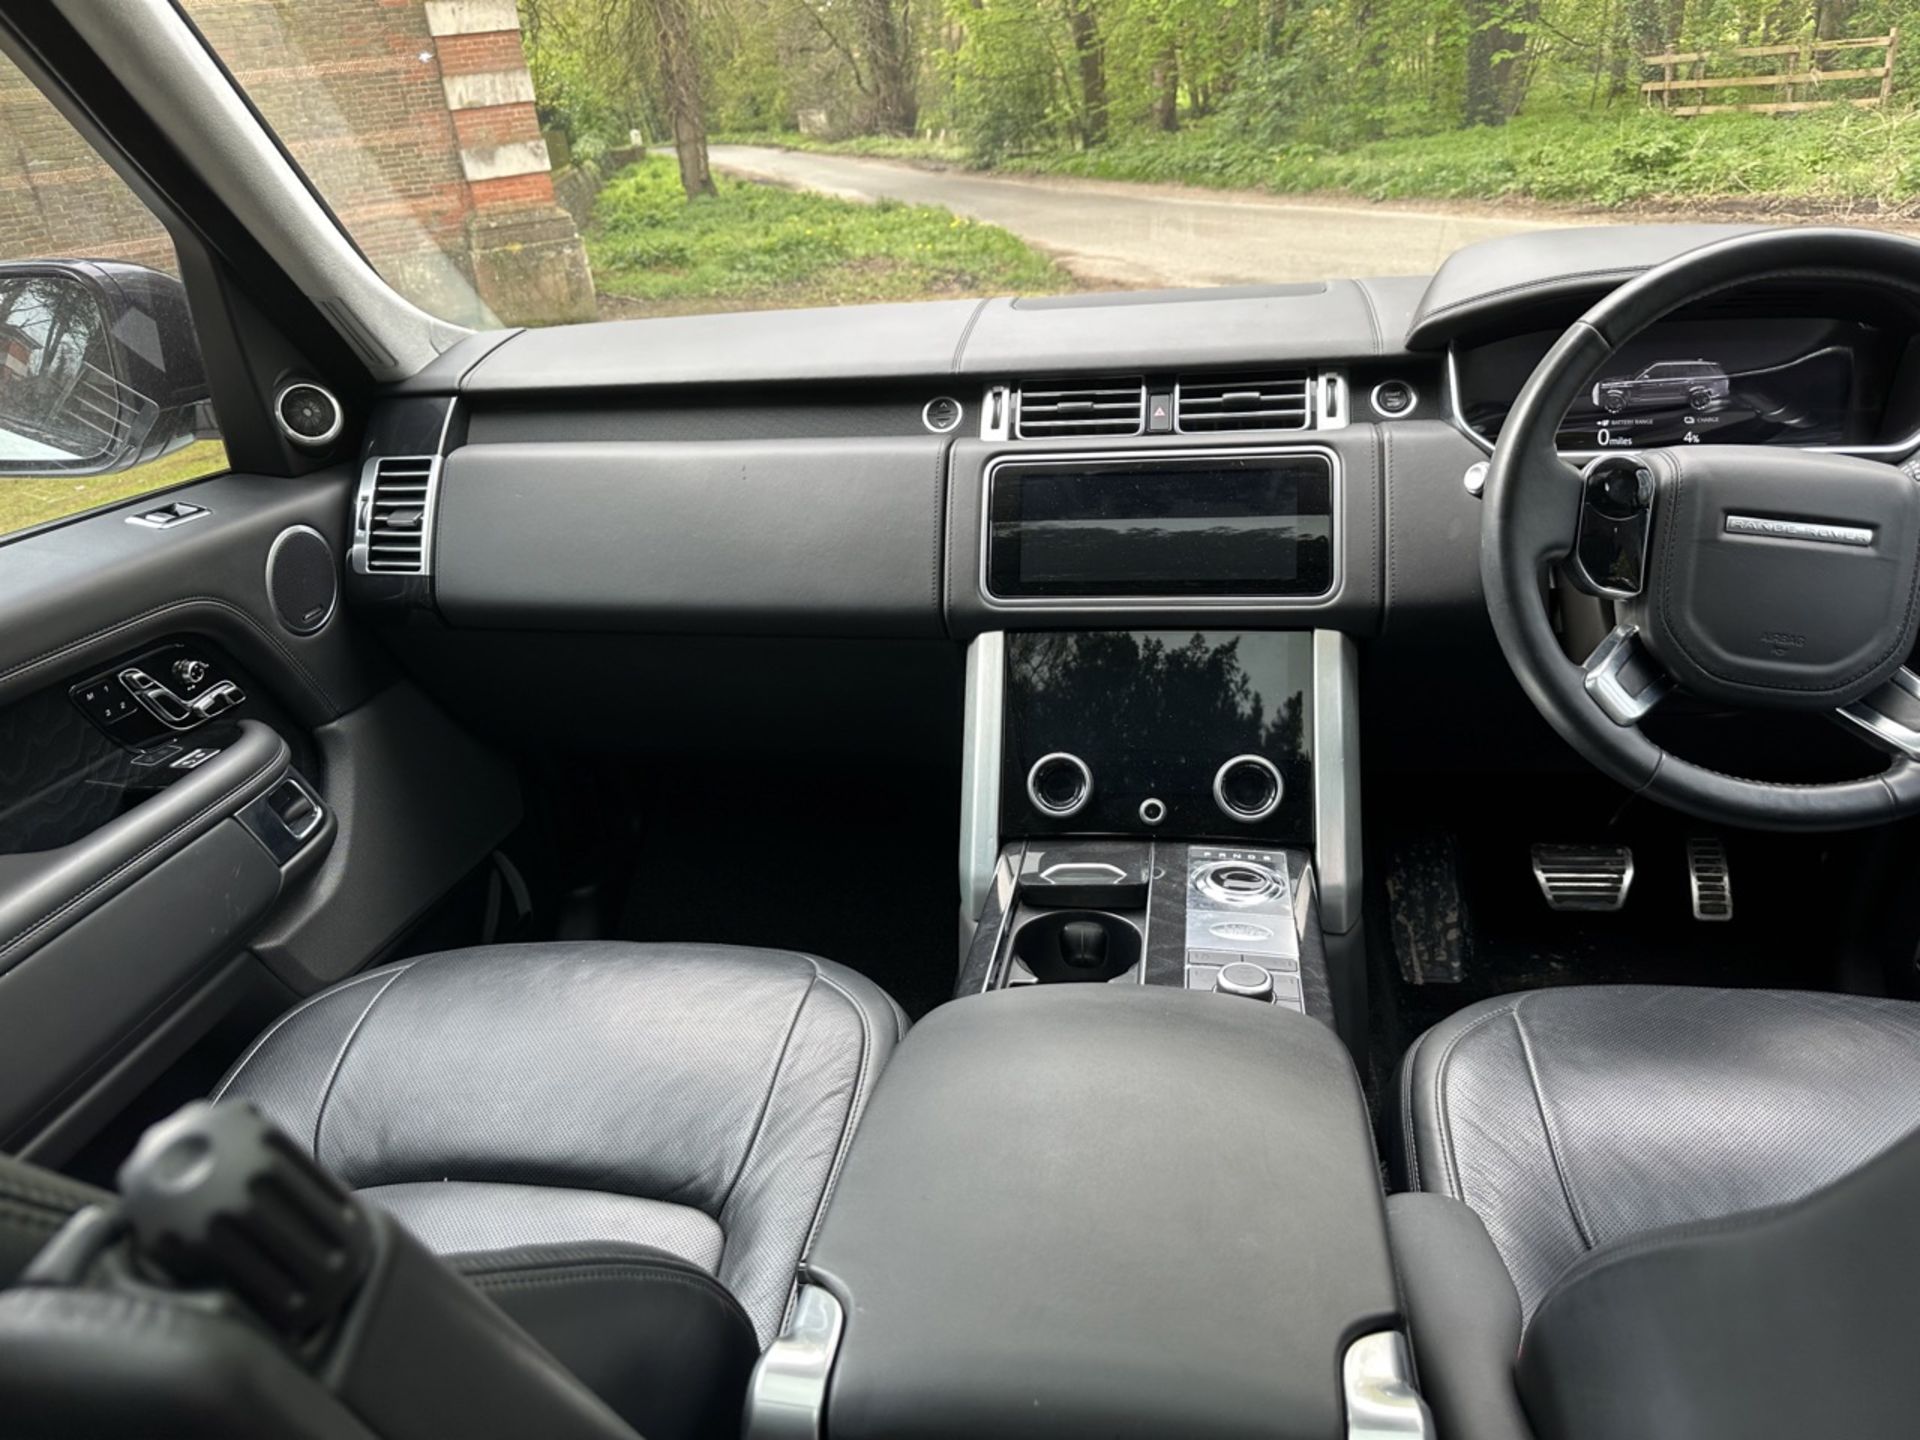 LAND ROVER RANGE ROVER 2.0 P400e Autobiography 4dr Auto - Automatic - 2018 - 31k miles - FULL SH - Image 9 of 22